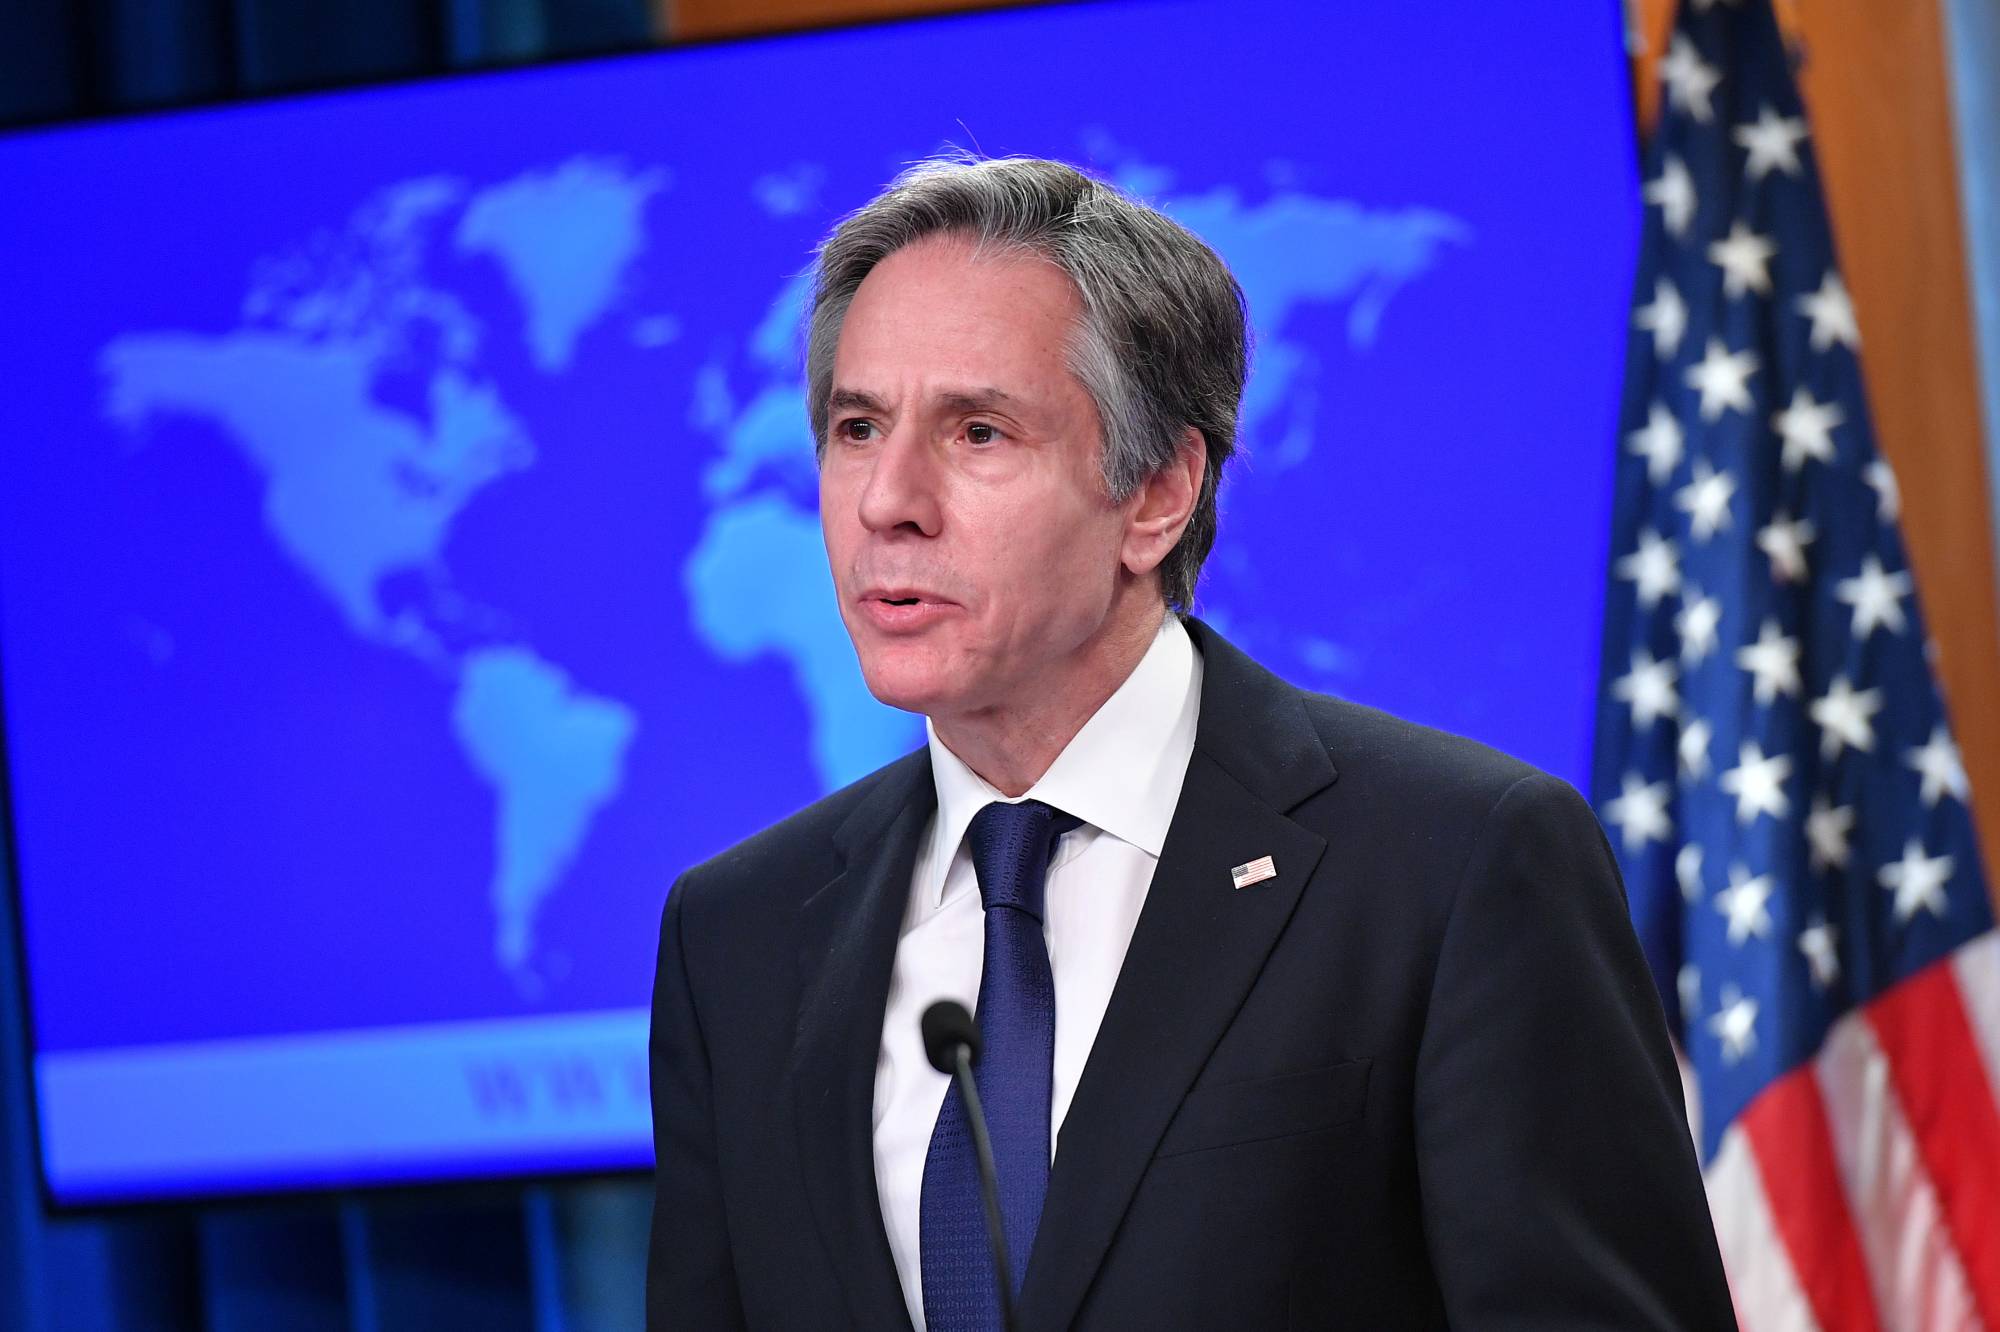 Hundreds of sanctions might remain against Iran, says Blinken